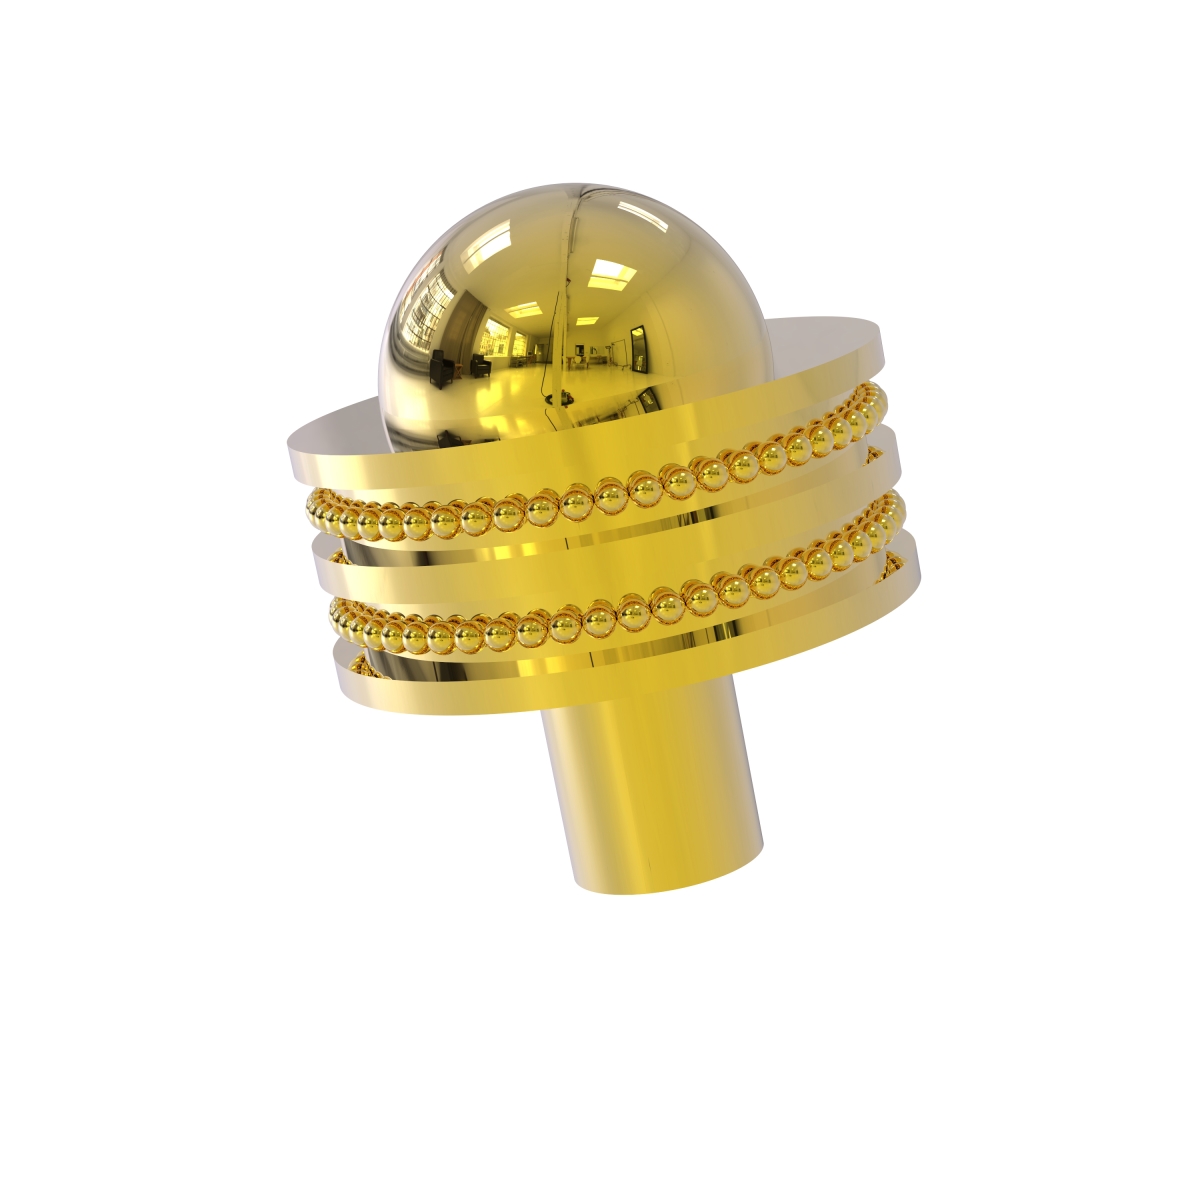 101ad-unl 1.5 X 1.5 X 1.5 In. Cabinet Knob With Dotted Ring Style, Unlacquered Brass